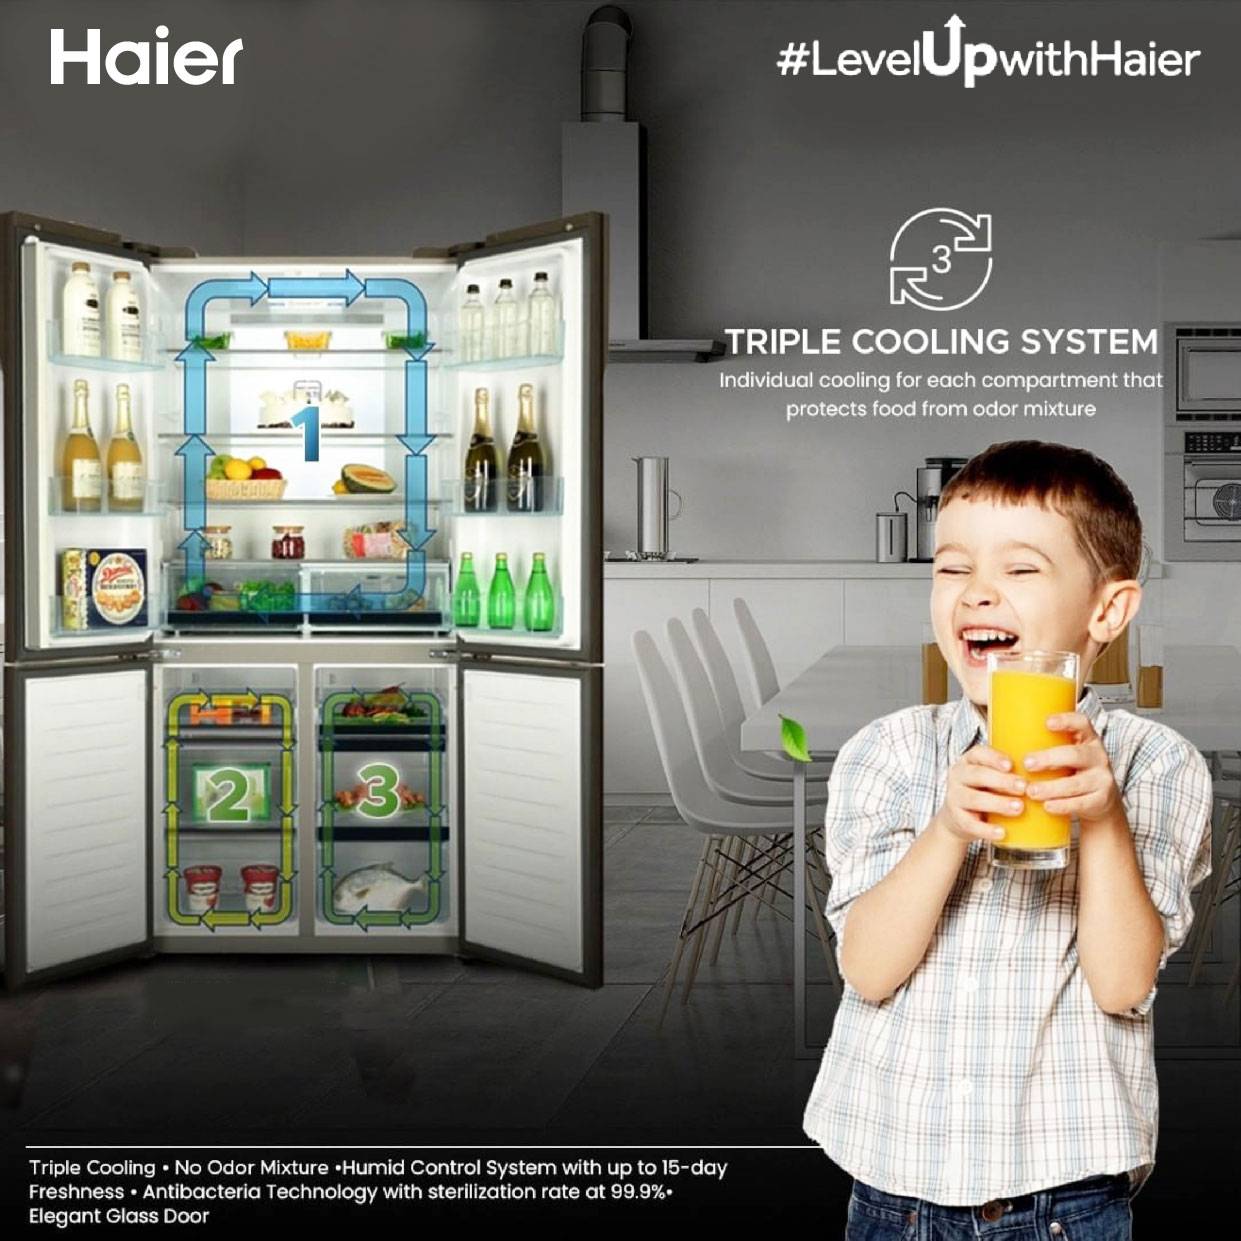 Fruit shakes made fresher! Thanks to Haier Triple Cooling Refrigerator, built with up to 3 individual cooling system so the smell of your food won’t mix and spread. Now that’s smart living.